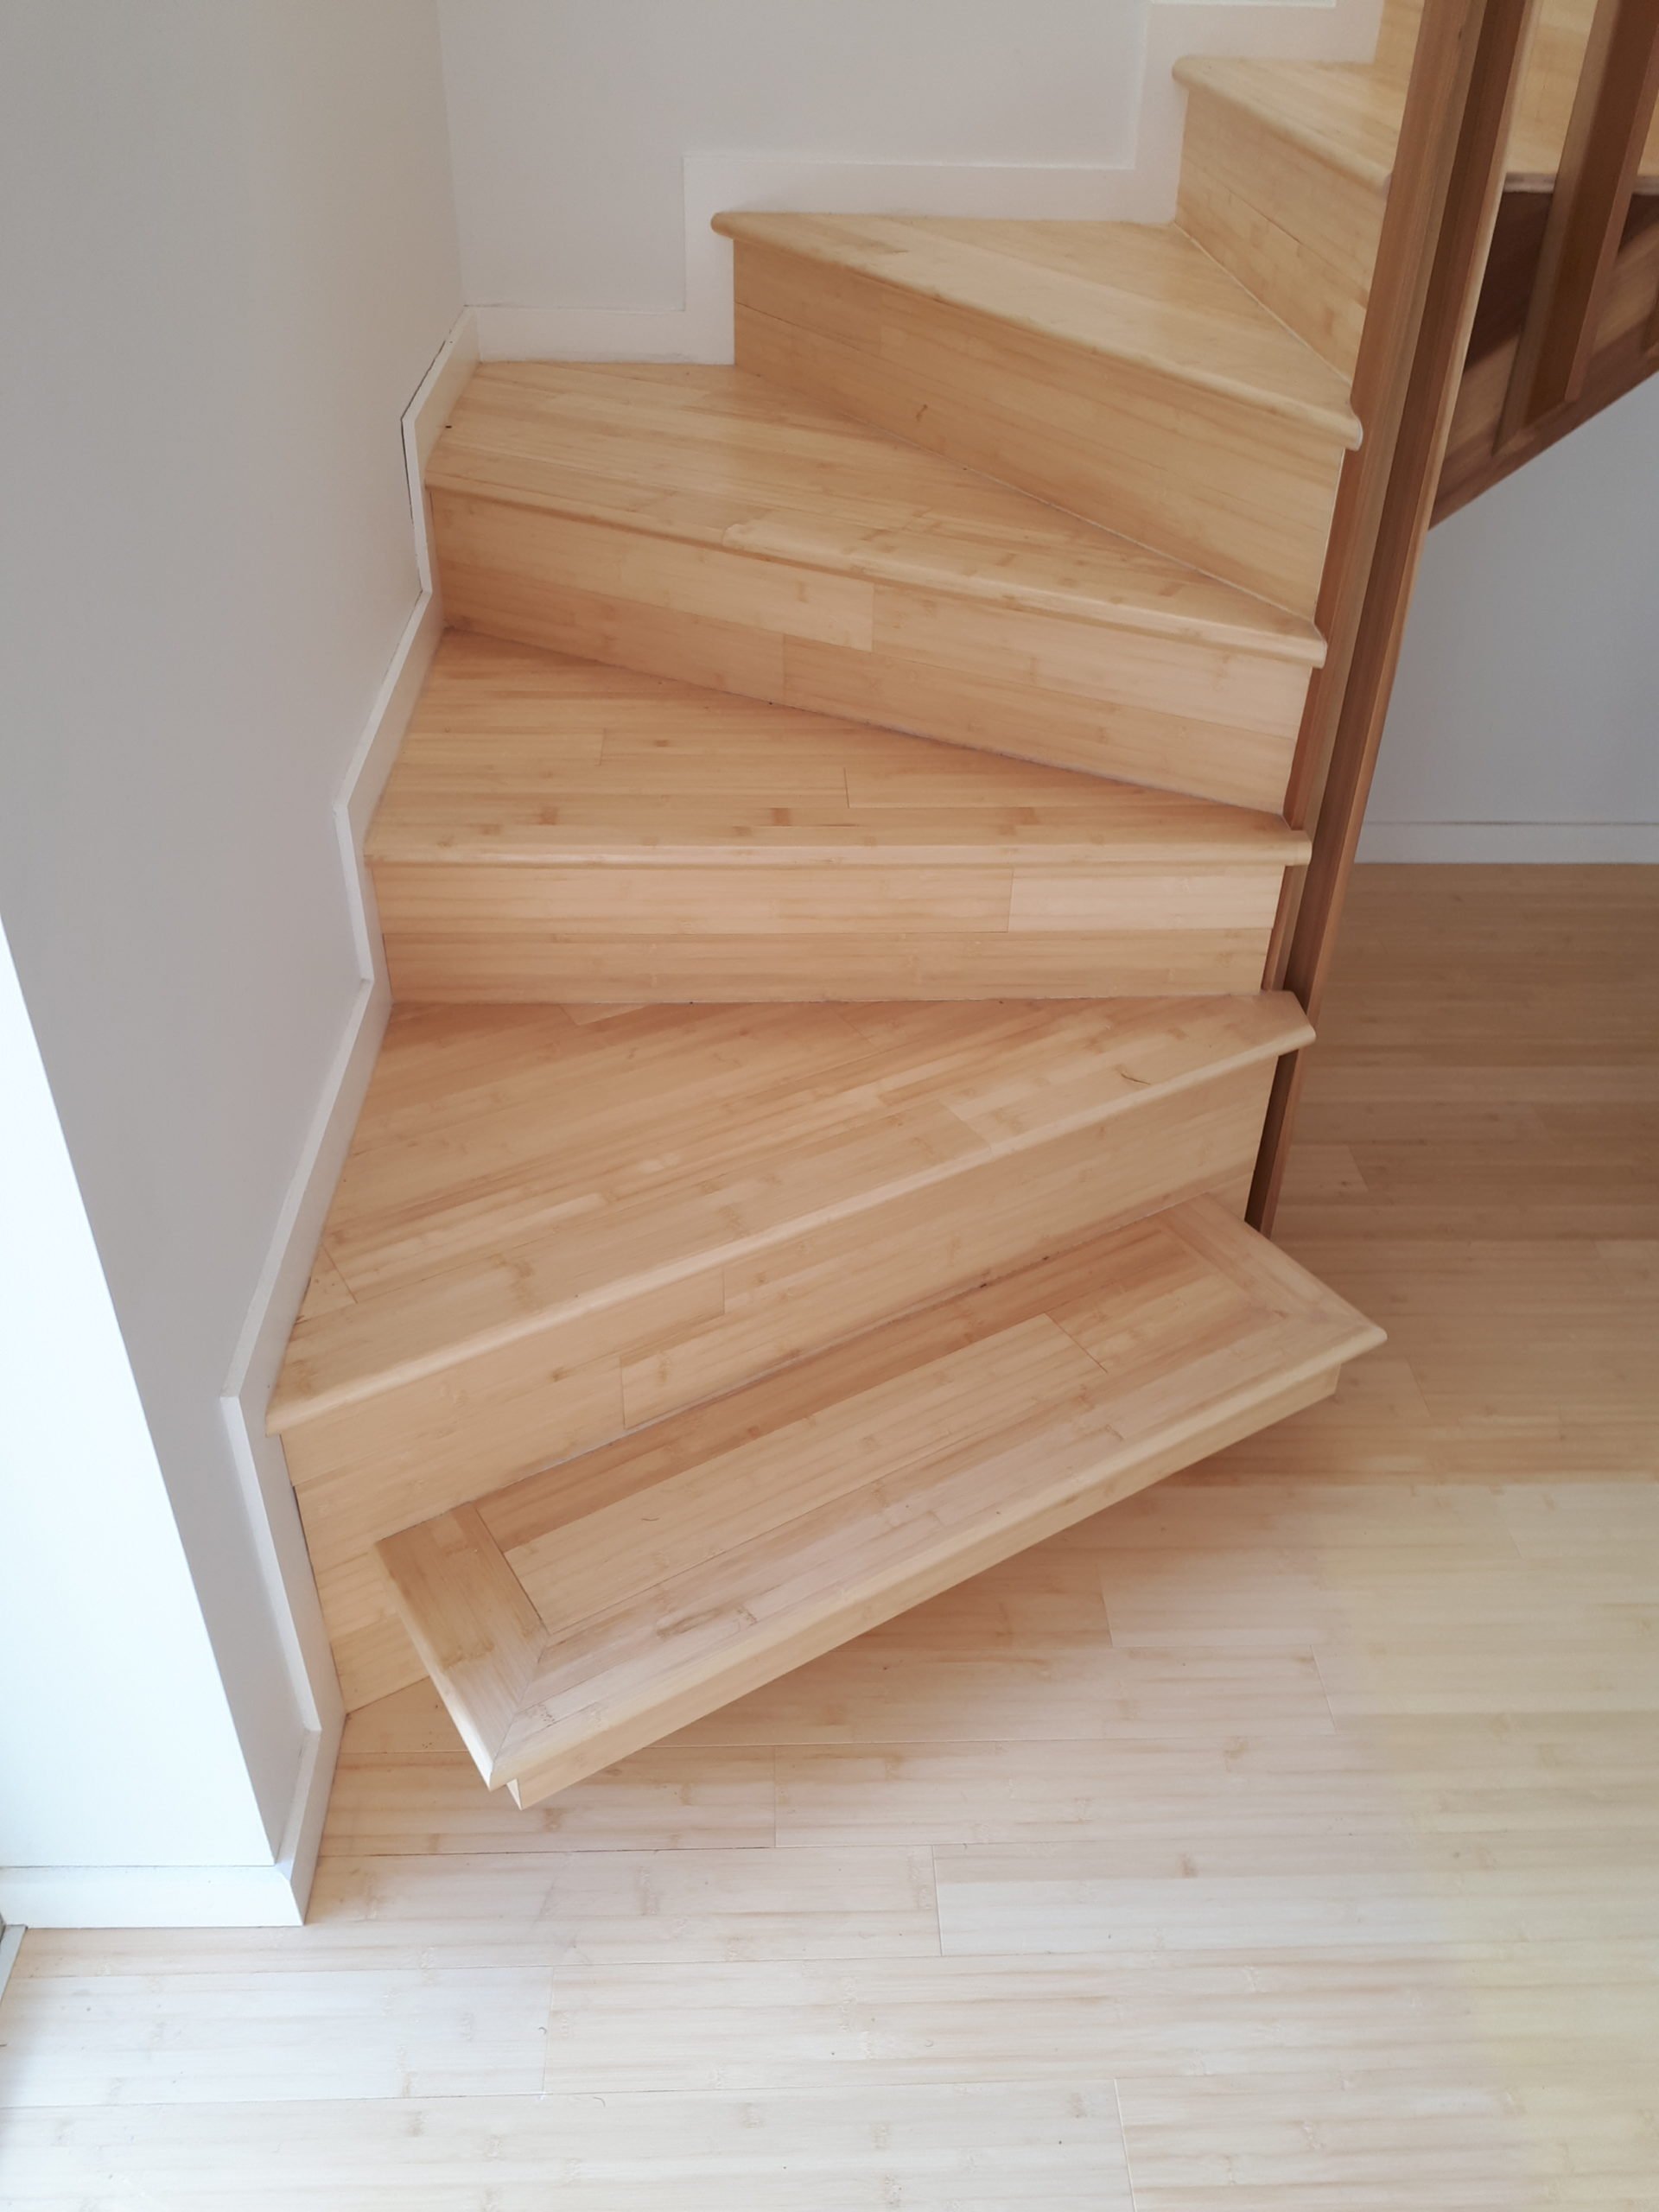 What does bamboo flooring look like on a staircase?